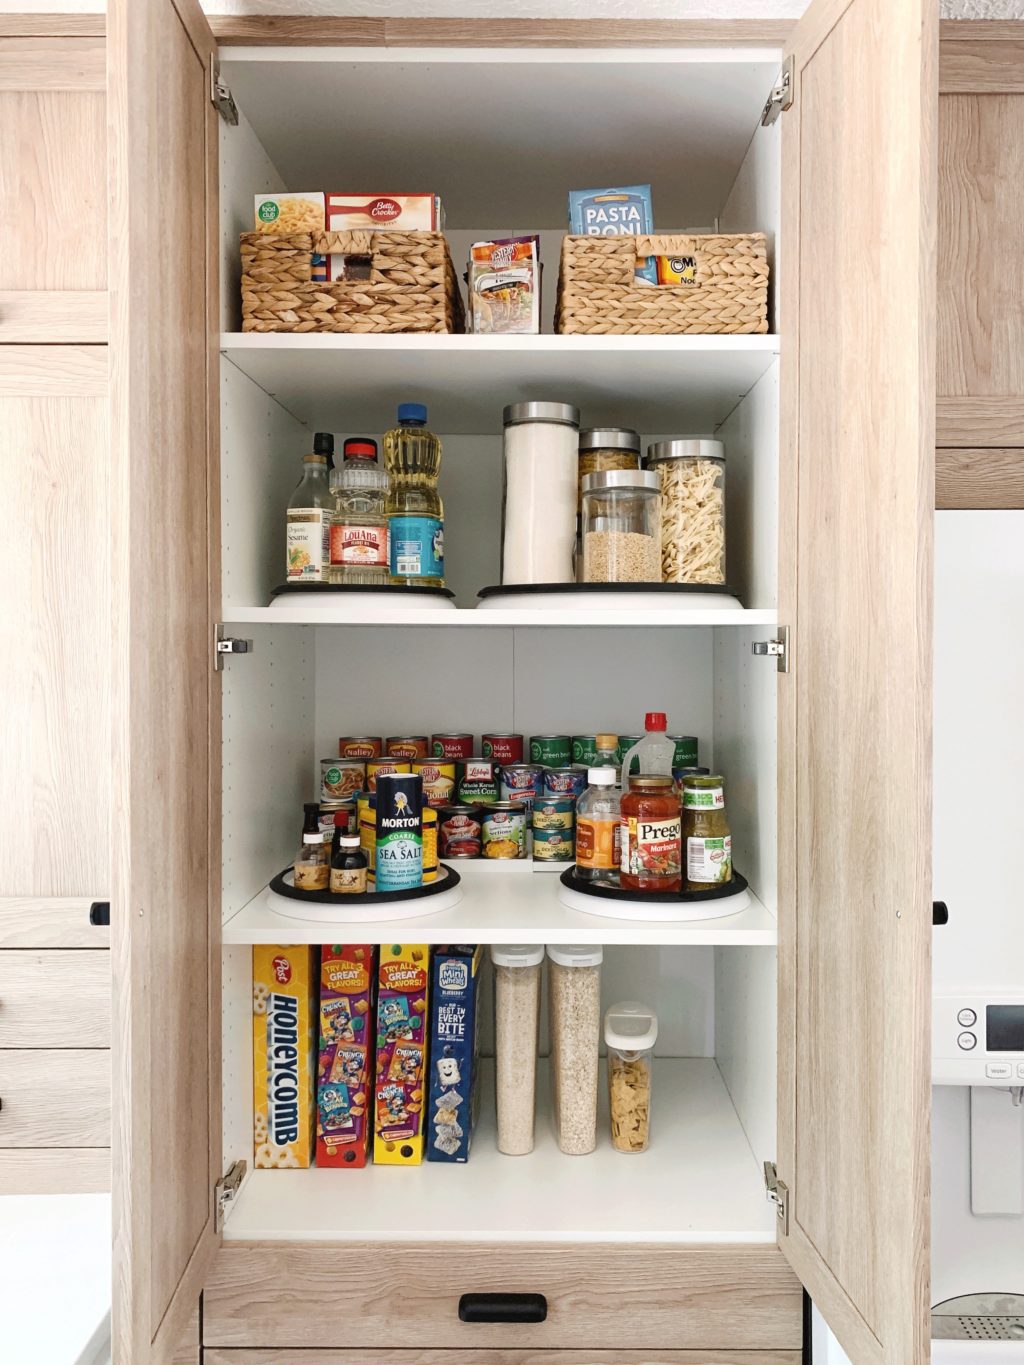 How We Organized the Fullmer's Kitchen Cabinets + A Video Tour